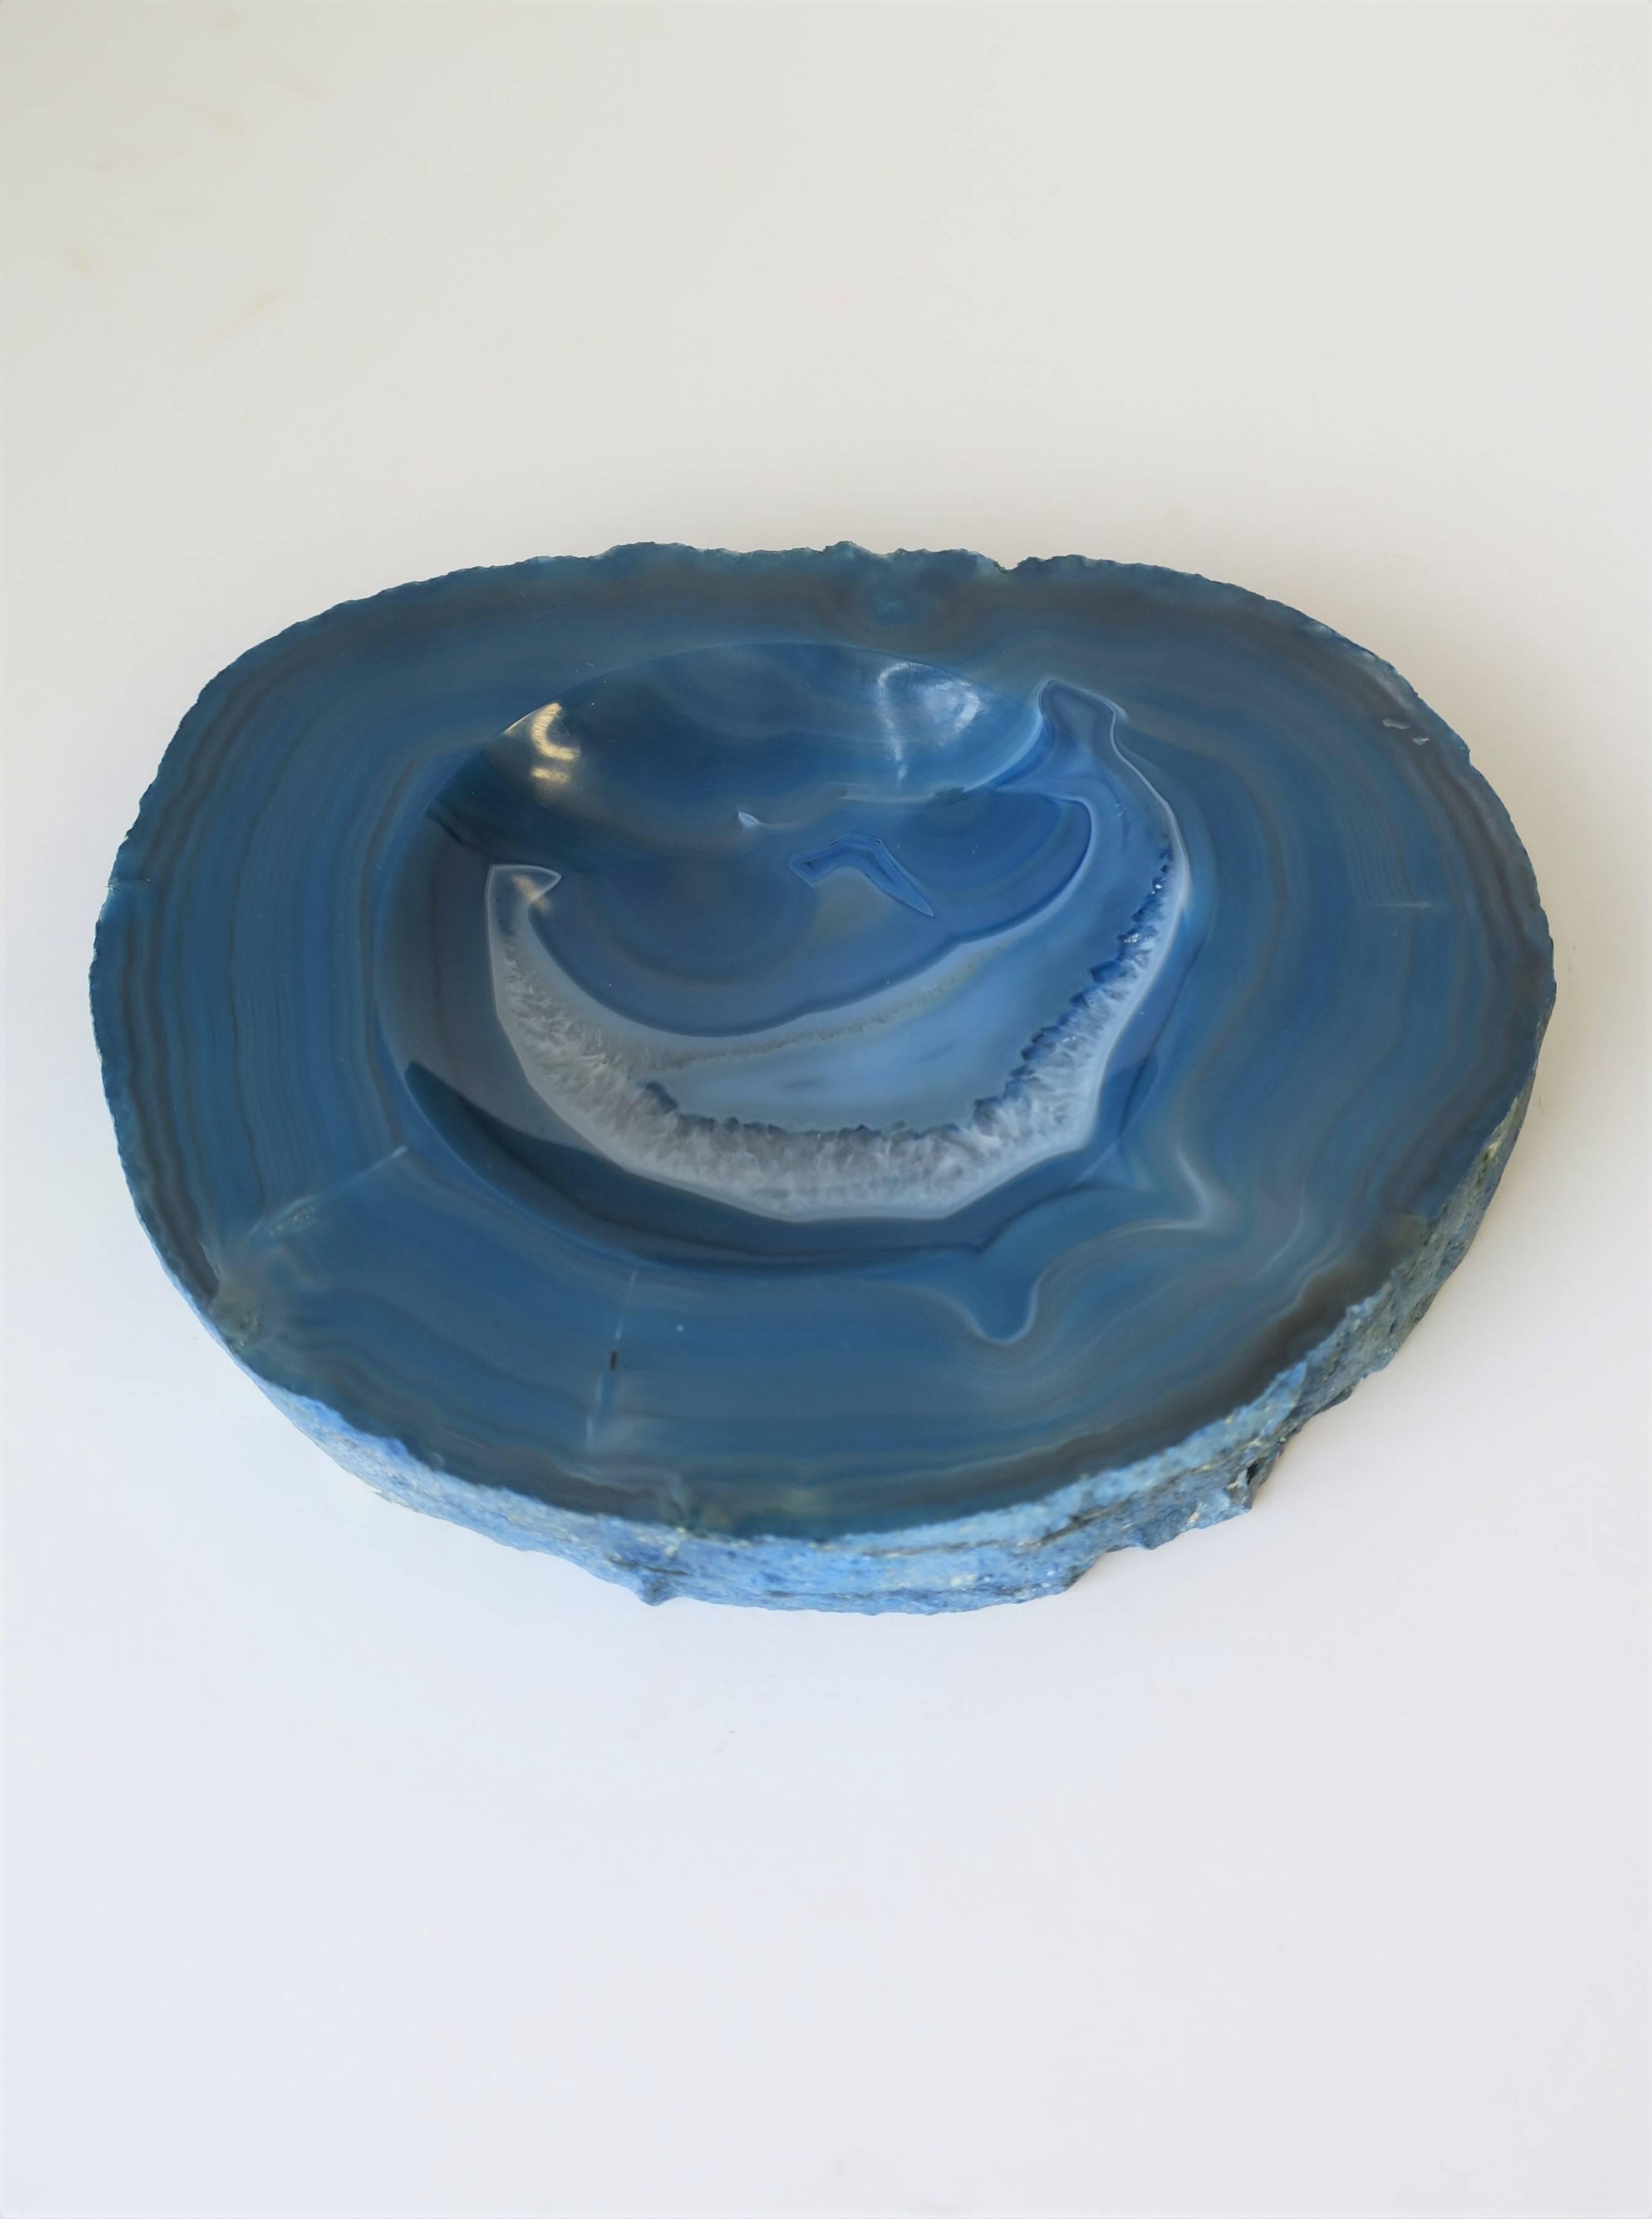 20th Century Blue and White Agate Onyx Jewelry Dish or Decorative Object